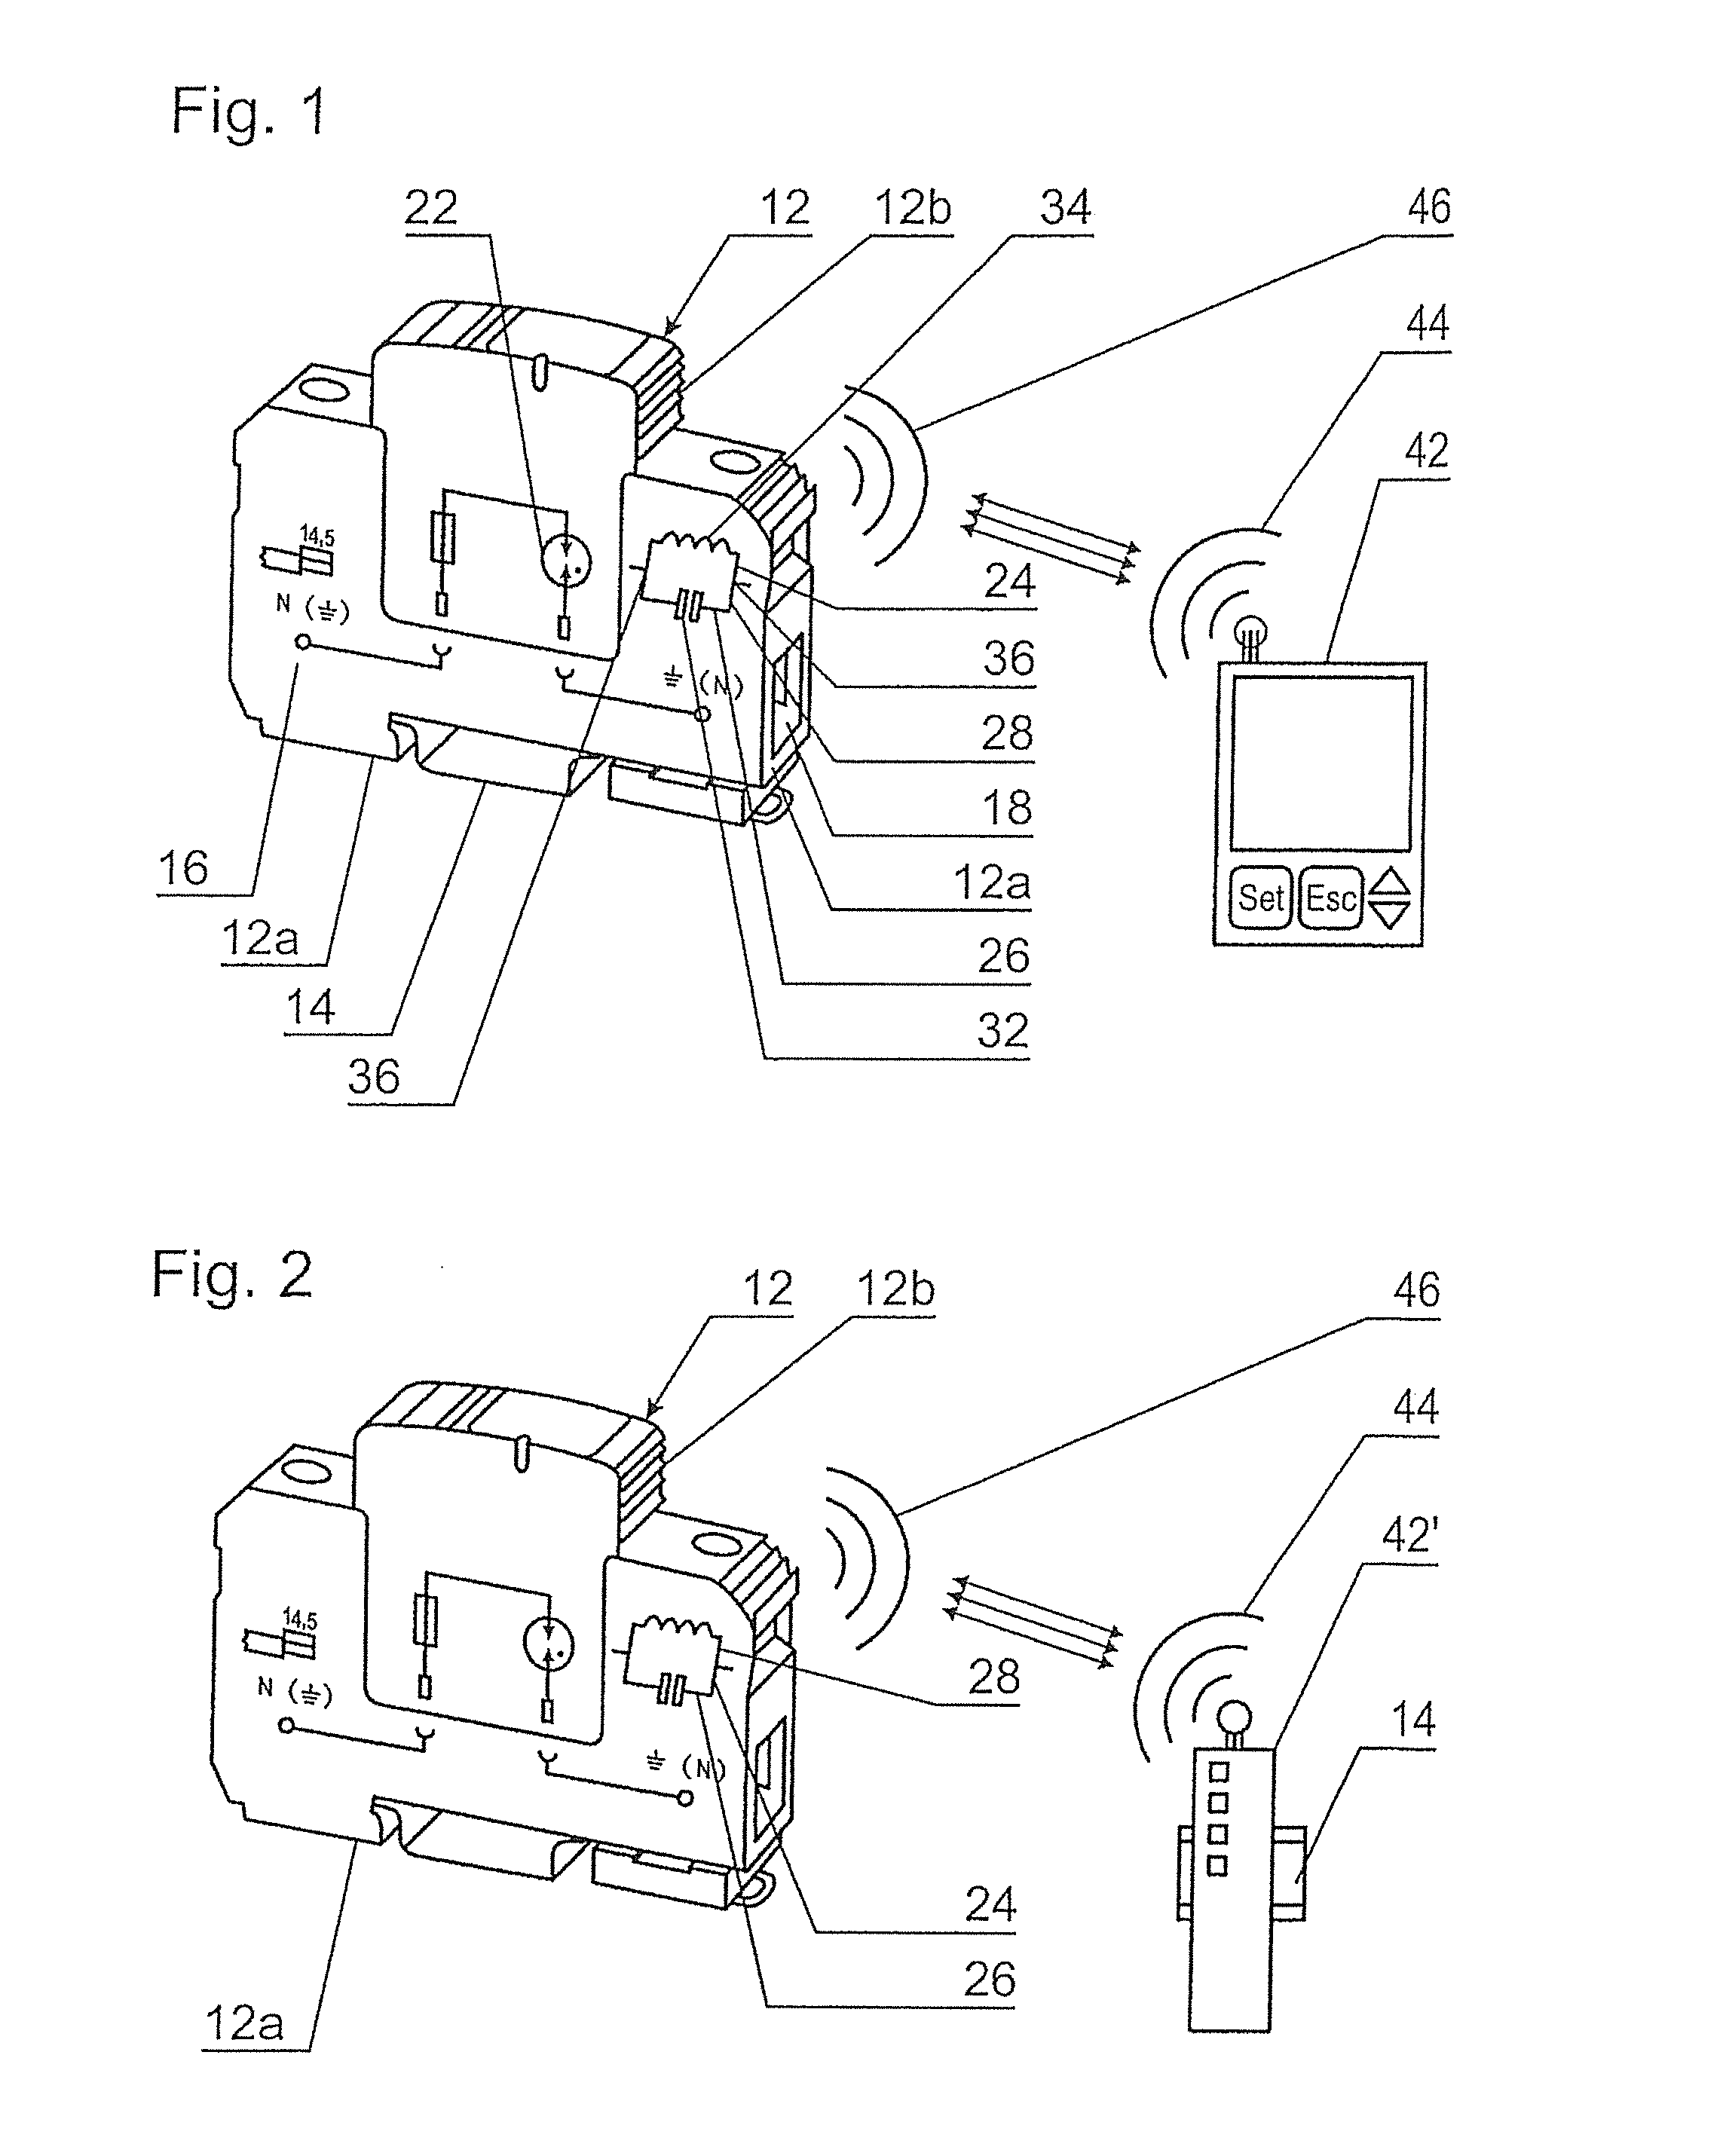 State monitoring or diagnostics system